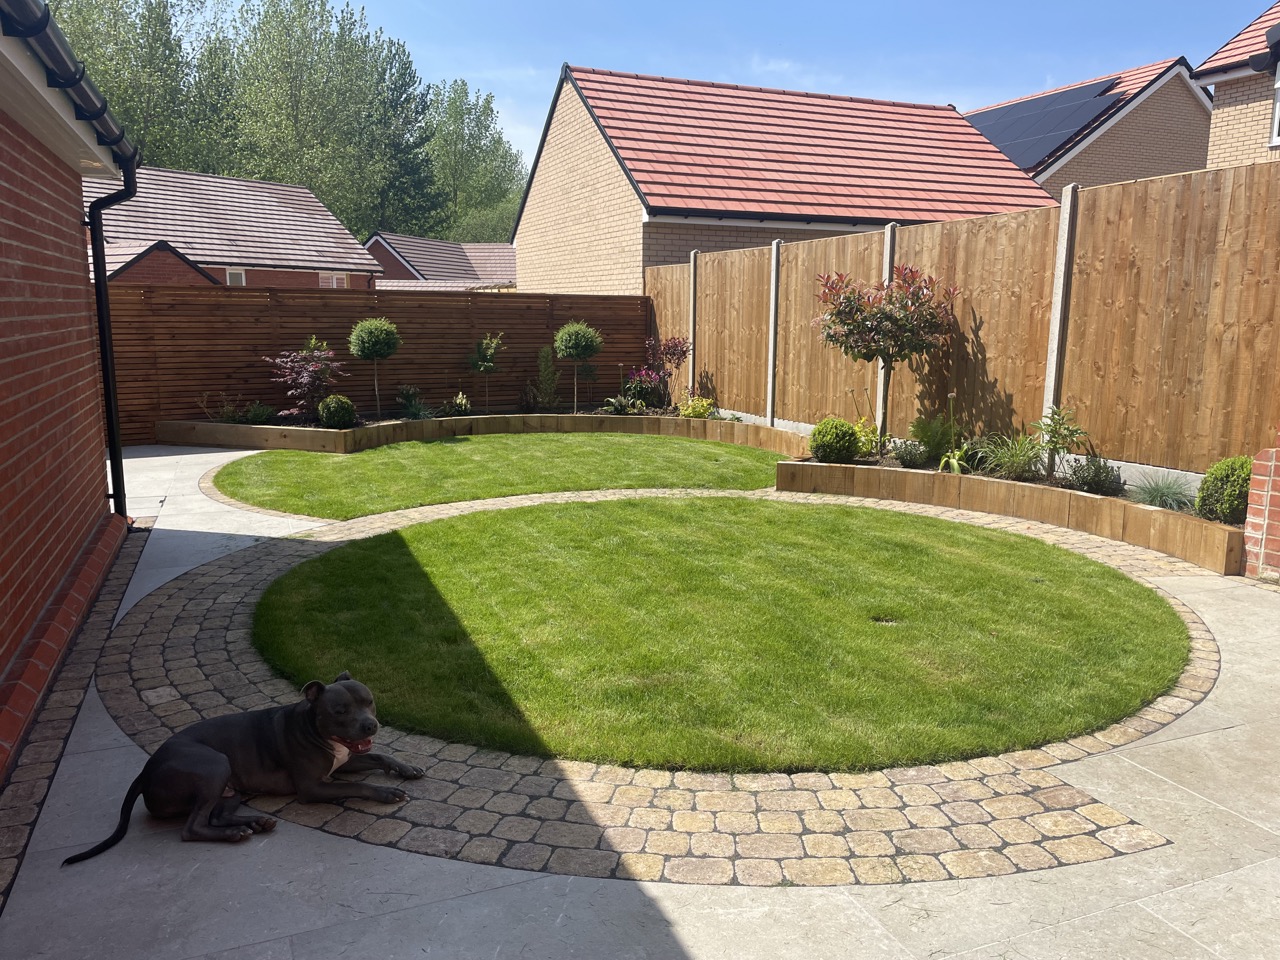 Embracing Curves: Why Curves Are Popular For Garden Designs